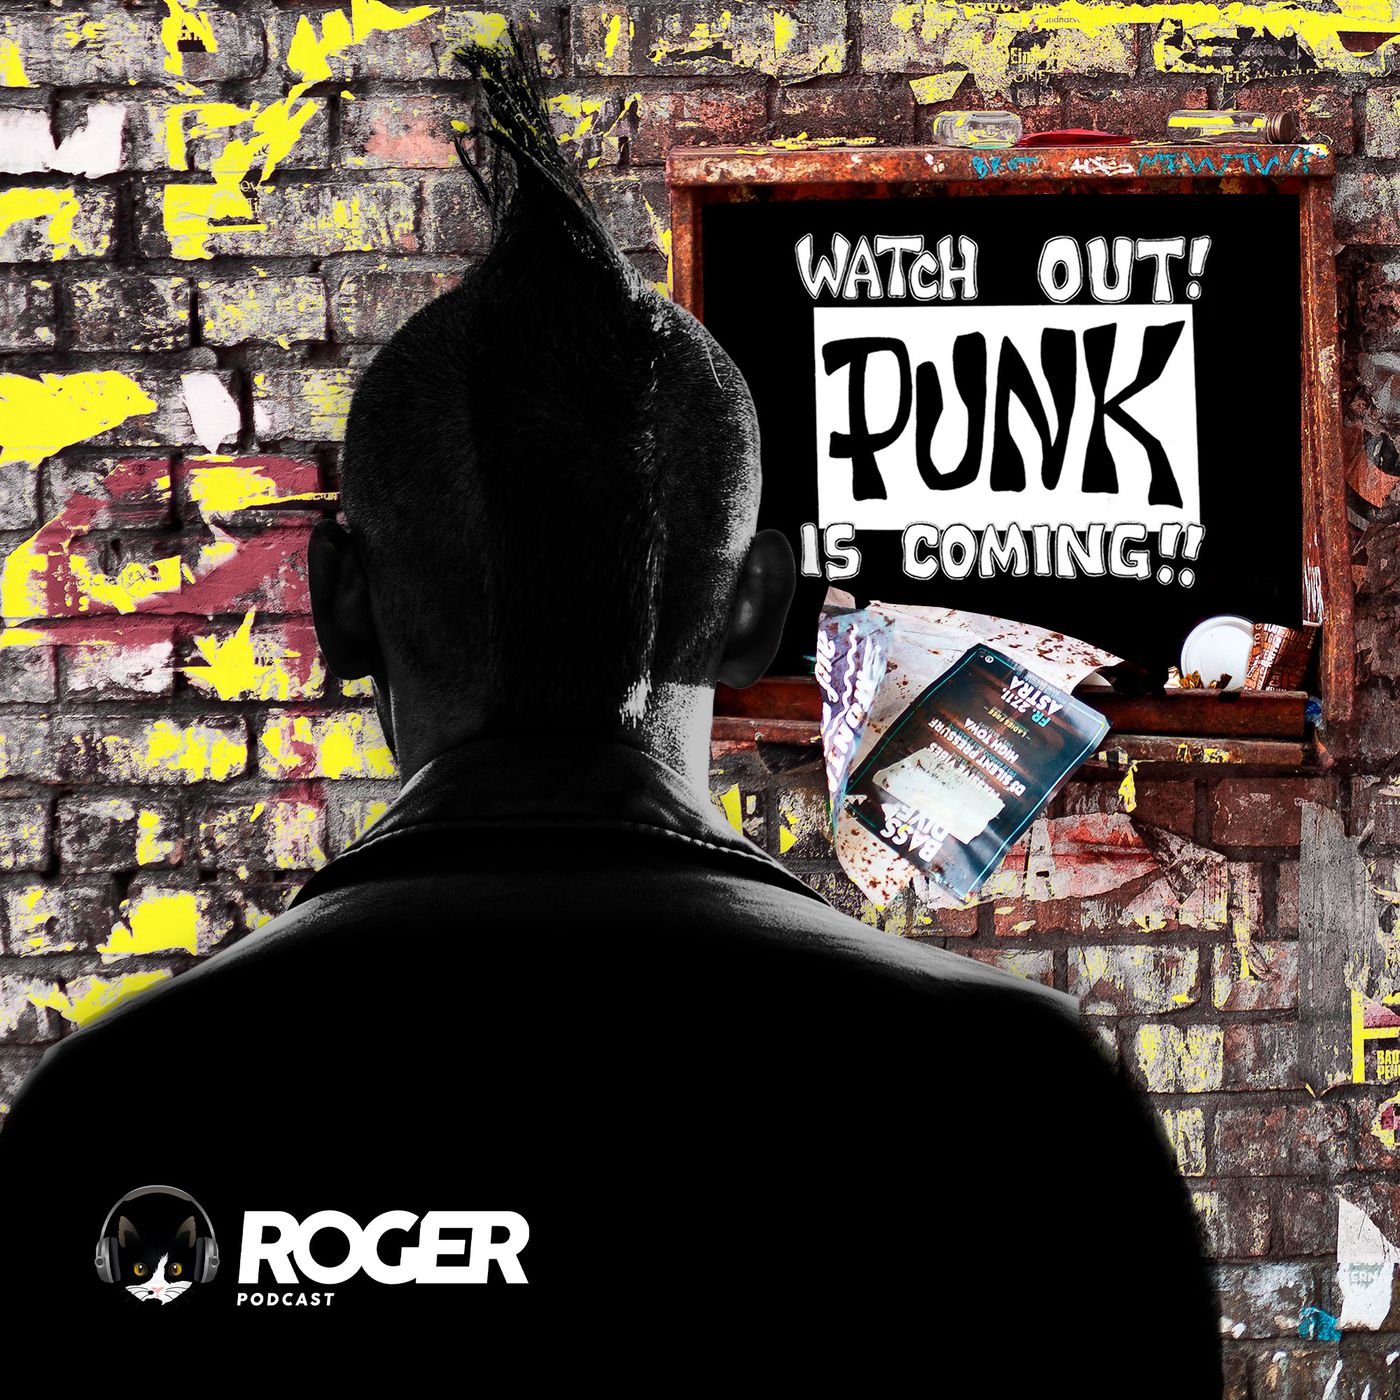 Watch Out! Punk is coming!!